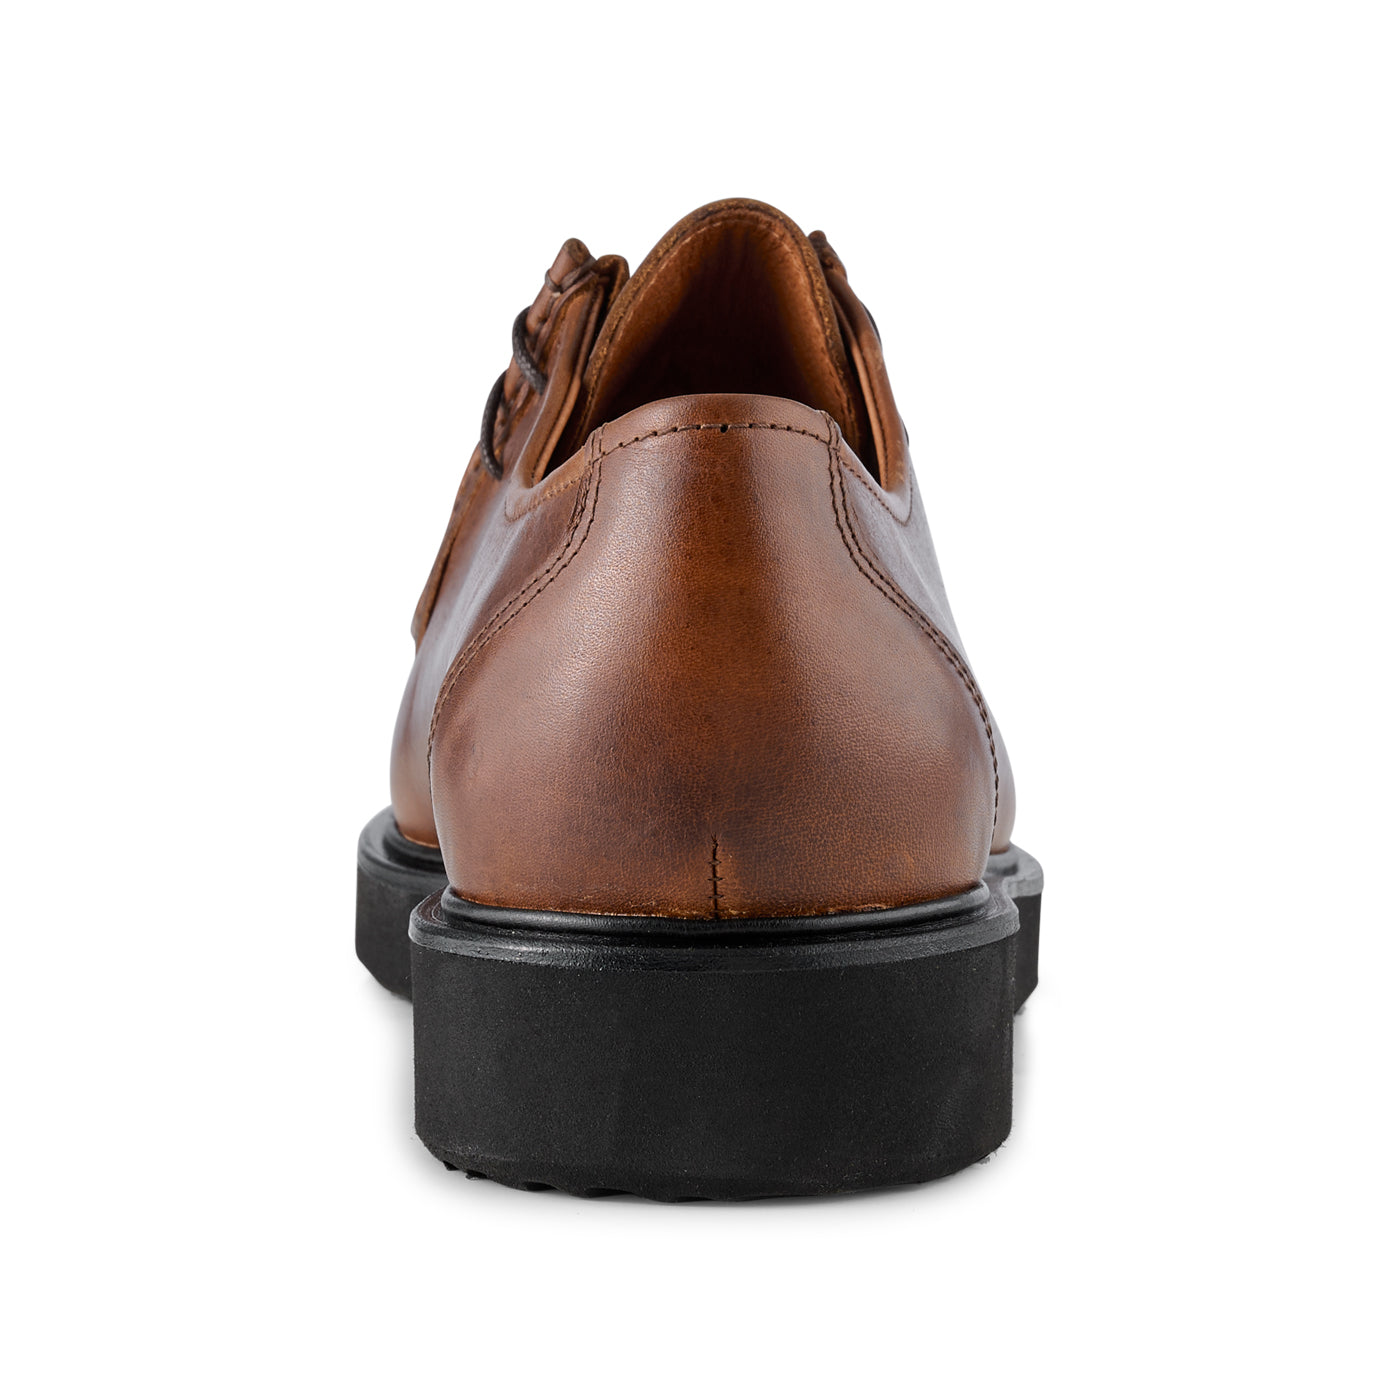 SHOE THE BEAR MENS Cosmos apron shoe leather Shoes 130 BROWN